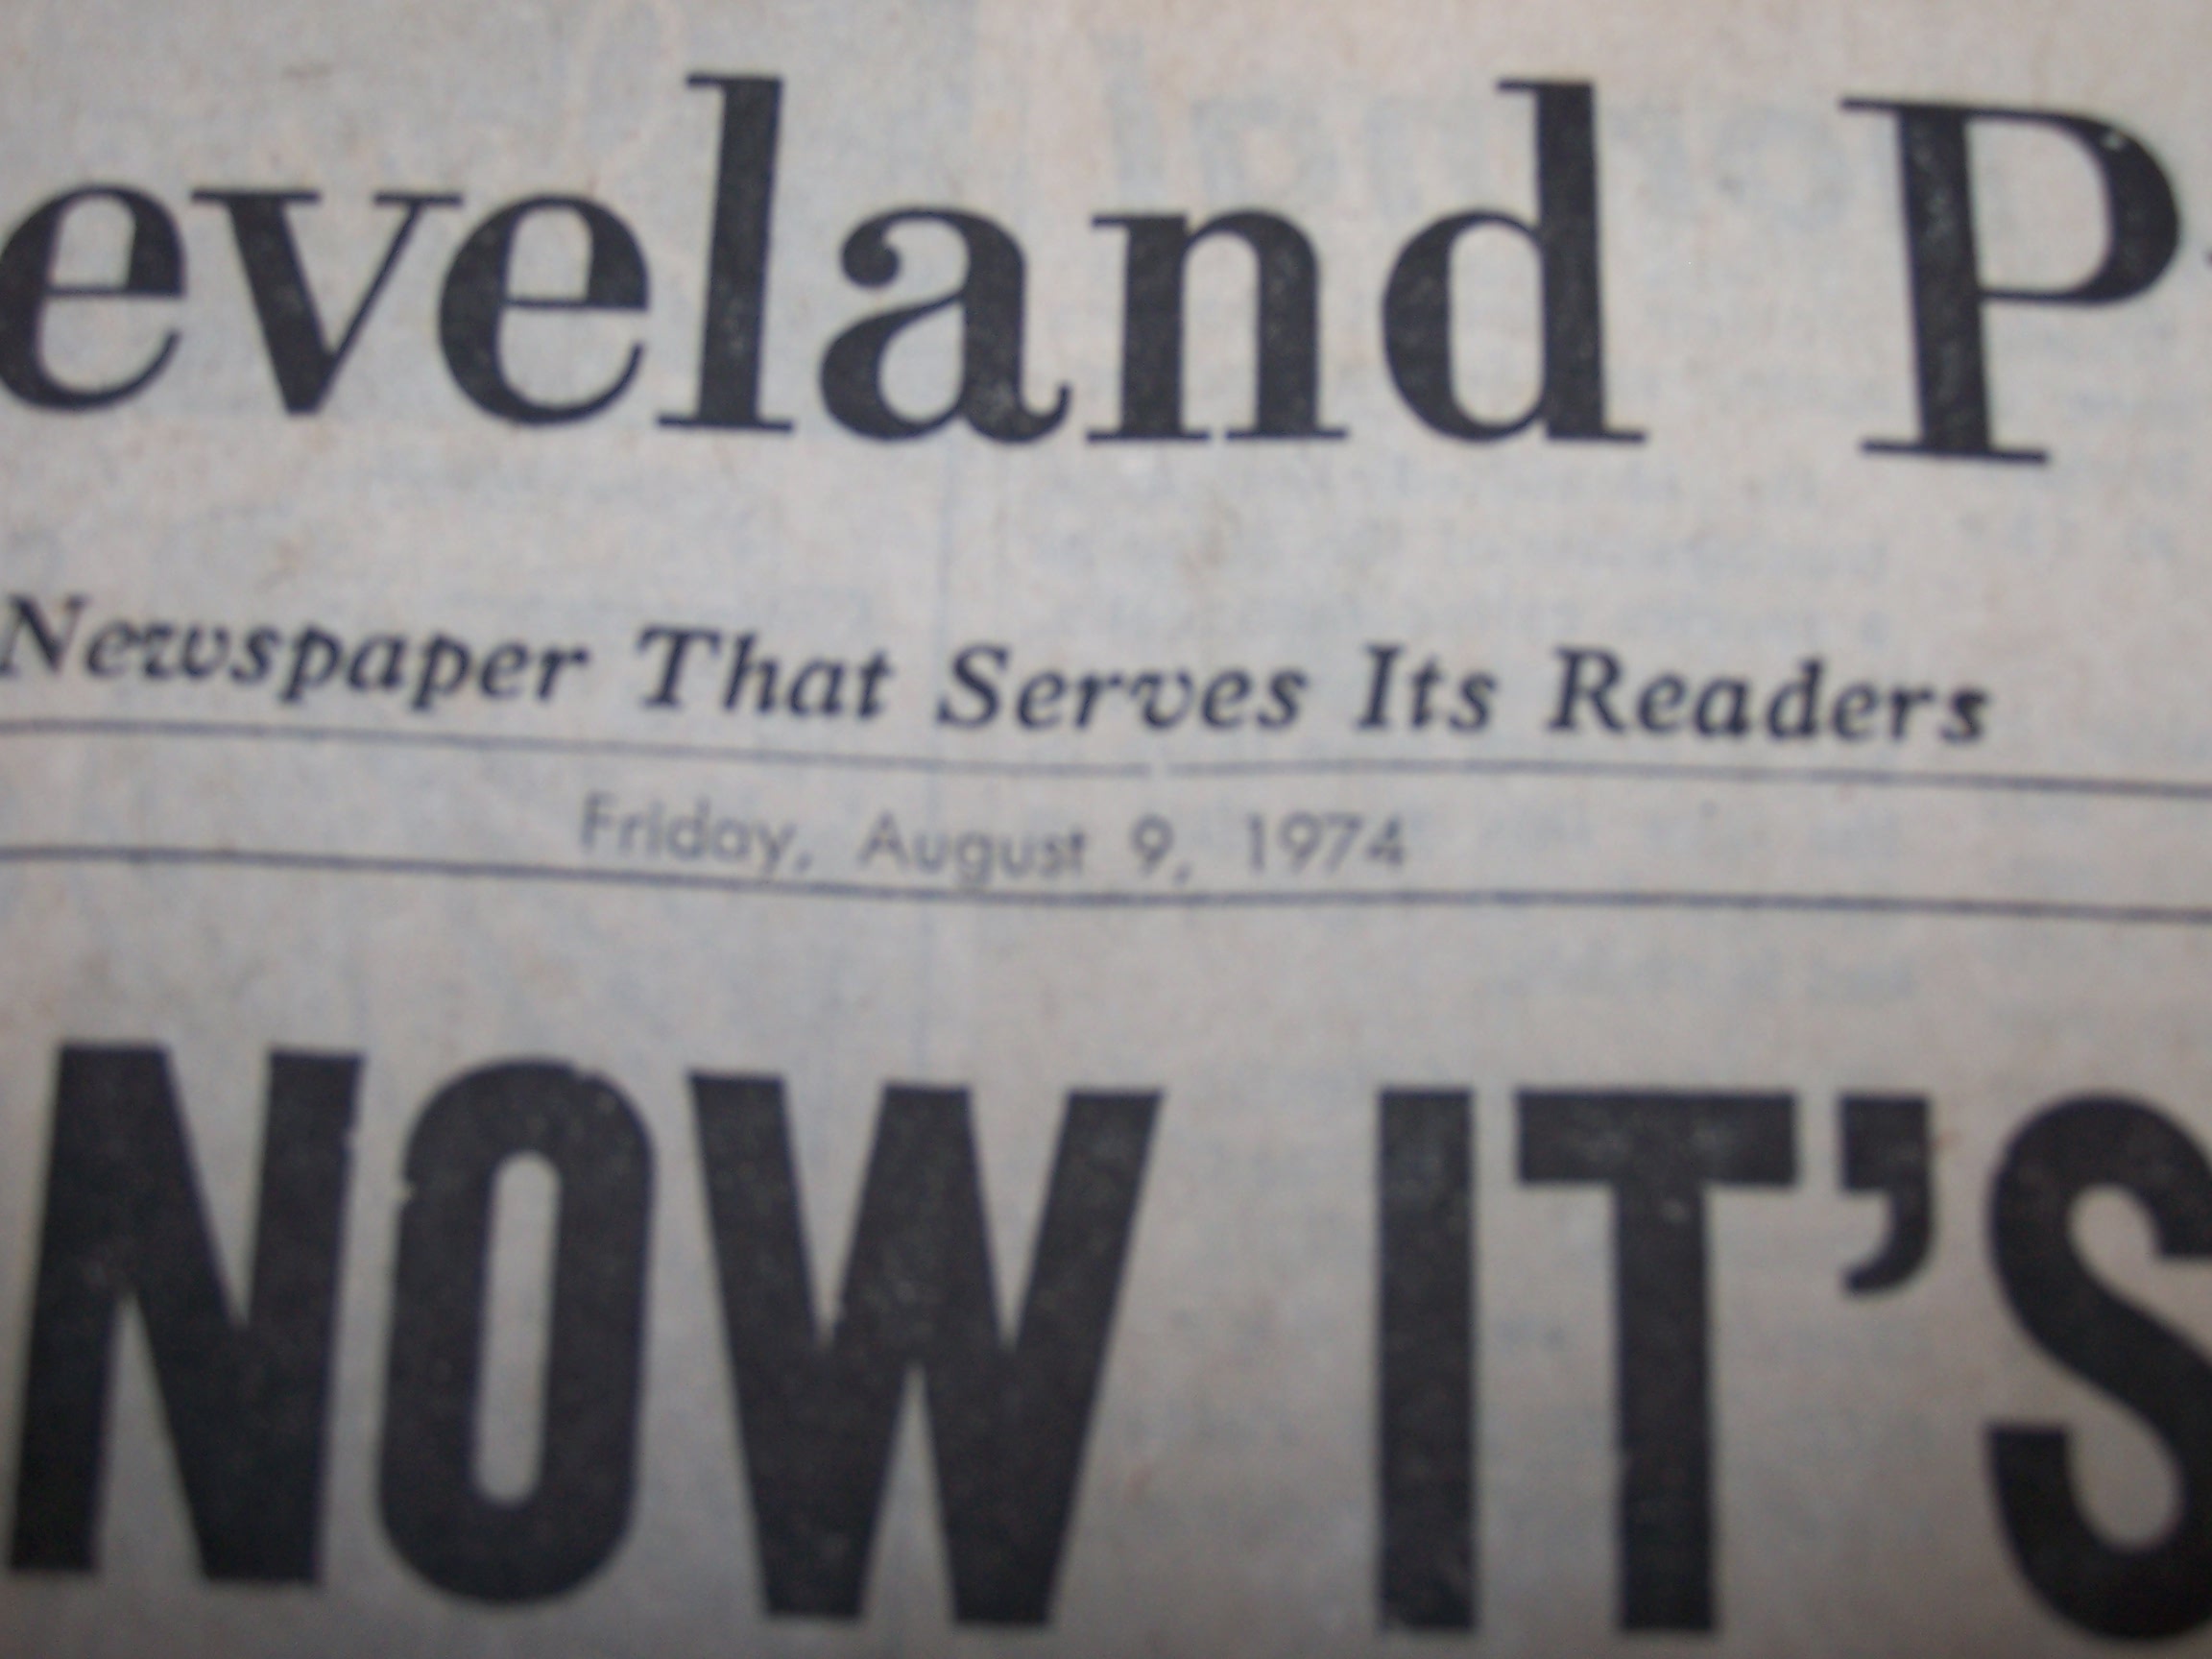 Image 2 of Nixon Resigns, Ford Steps Up, 1974, Cleveland Press